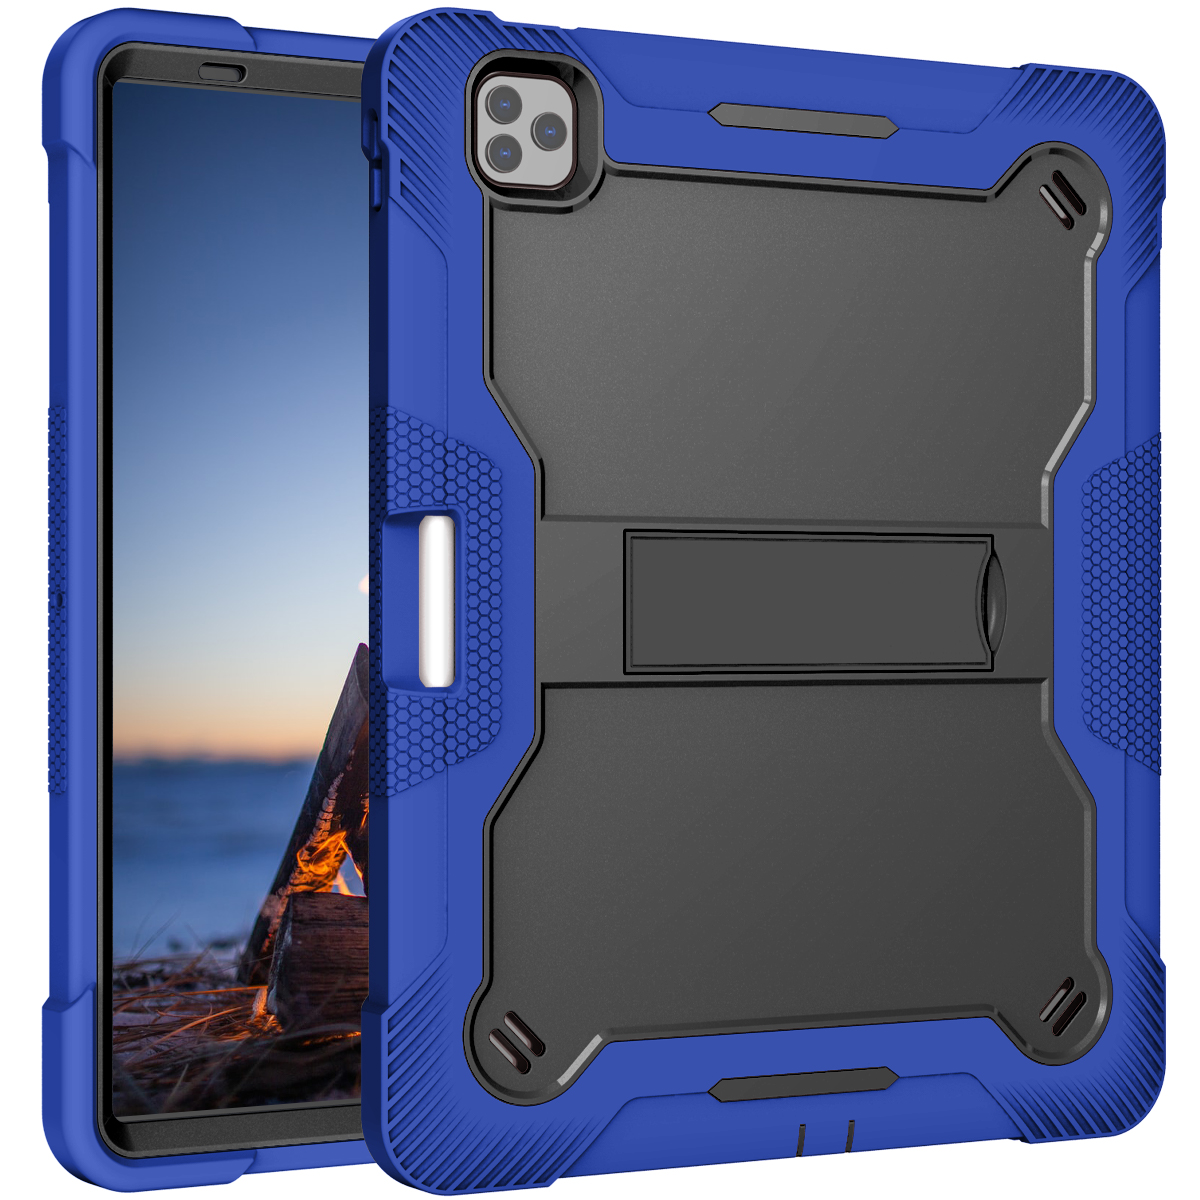 Heavy Duty Full Body Shockproof Protection Kickstand Hybrid Tablet Case Cover for Apple iPad Pro